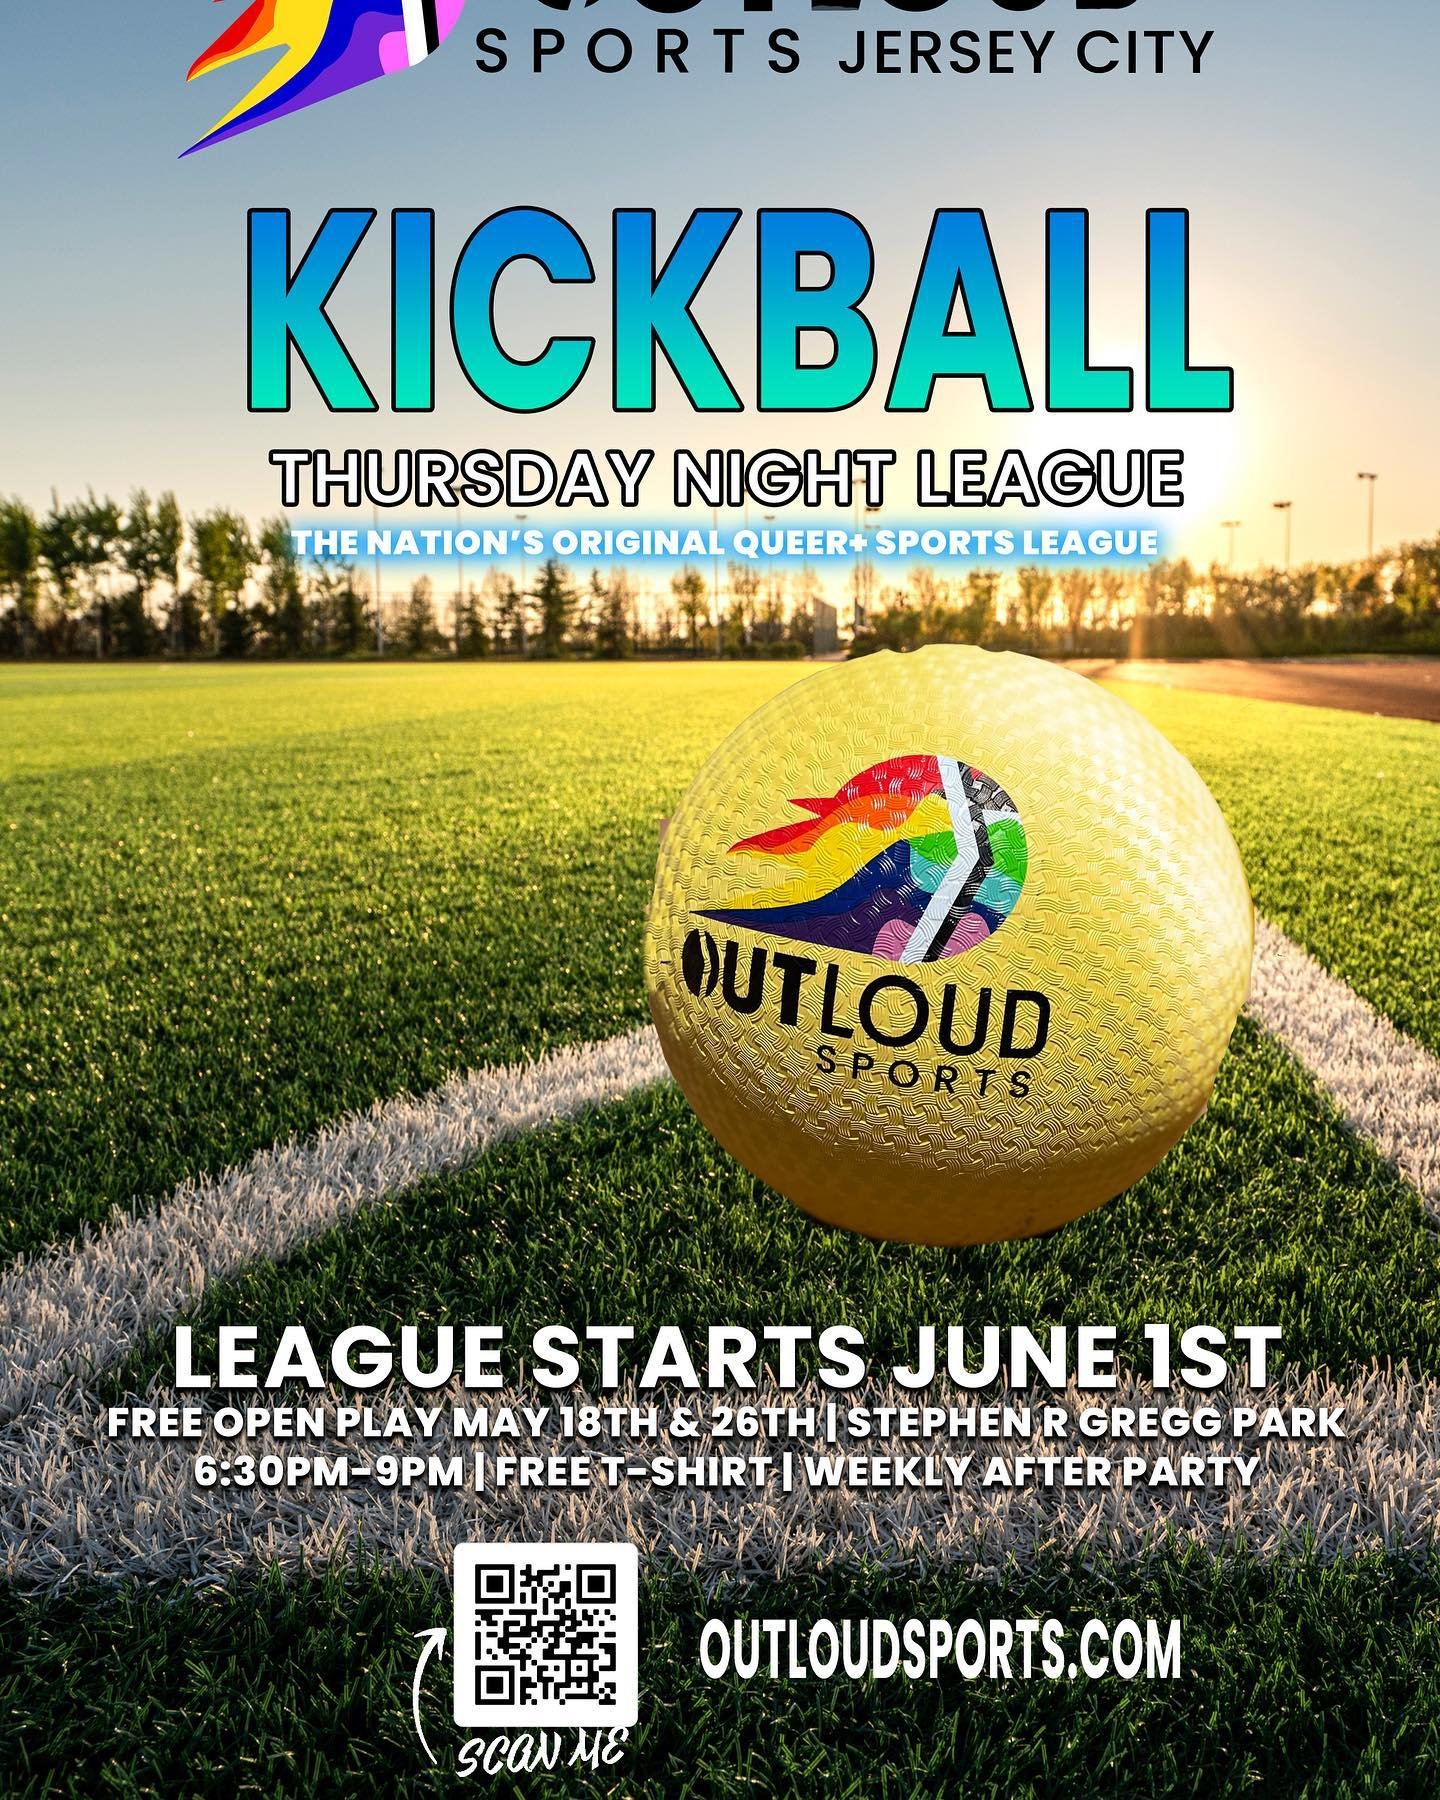 REGISTRATION IS OPEN AT https://outloudjerseycity.leagueapps.com/leagues

Bring a friend, heck start a team! This will be a summer that you won&rsquo;t forget. 

🔴🟠🟡🟢🔵🟣⚫️🟤
Starting June 1st

8 Week League + 2 Free Open Plays (May 18th and 25th